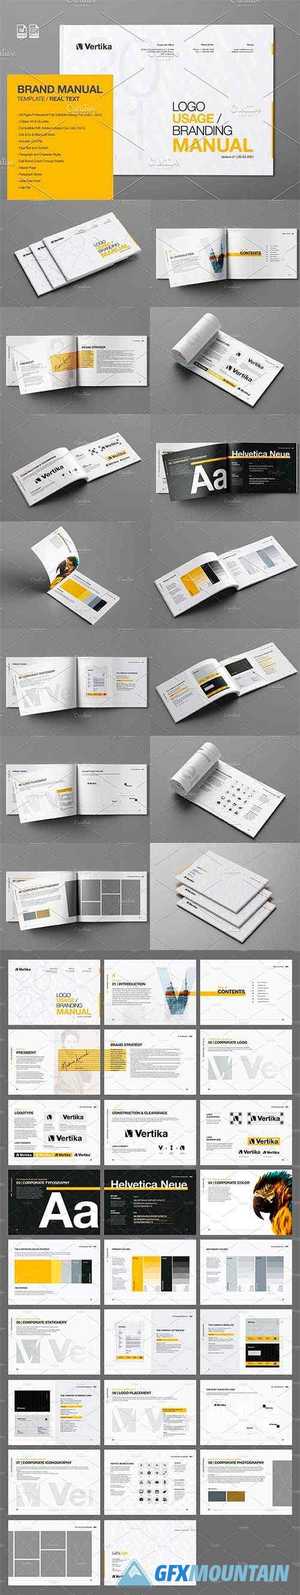 Brand Manual - REAL TEXT 4604201